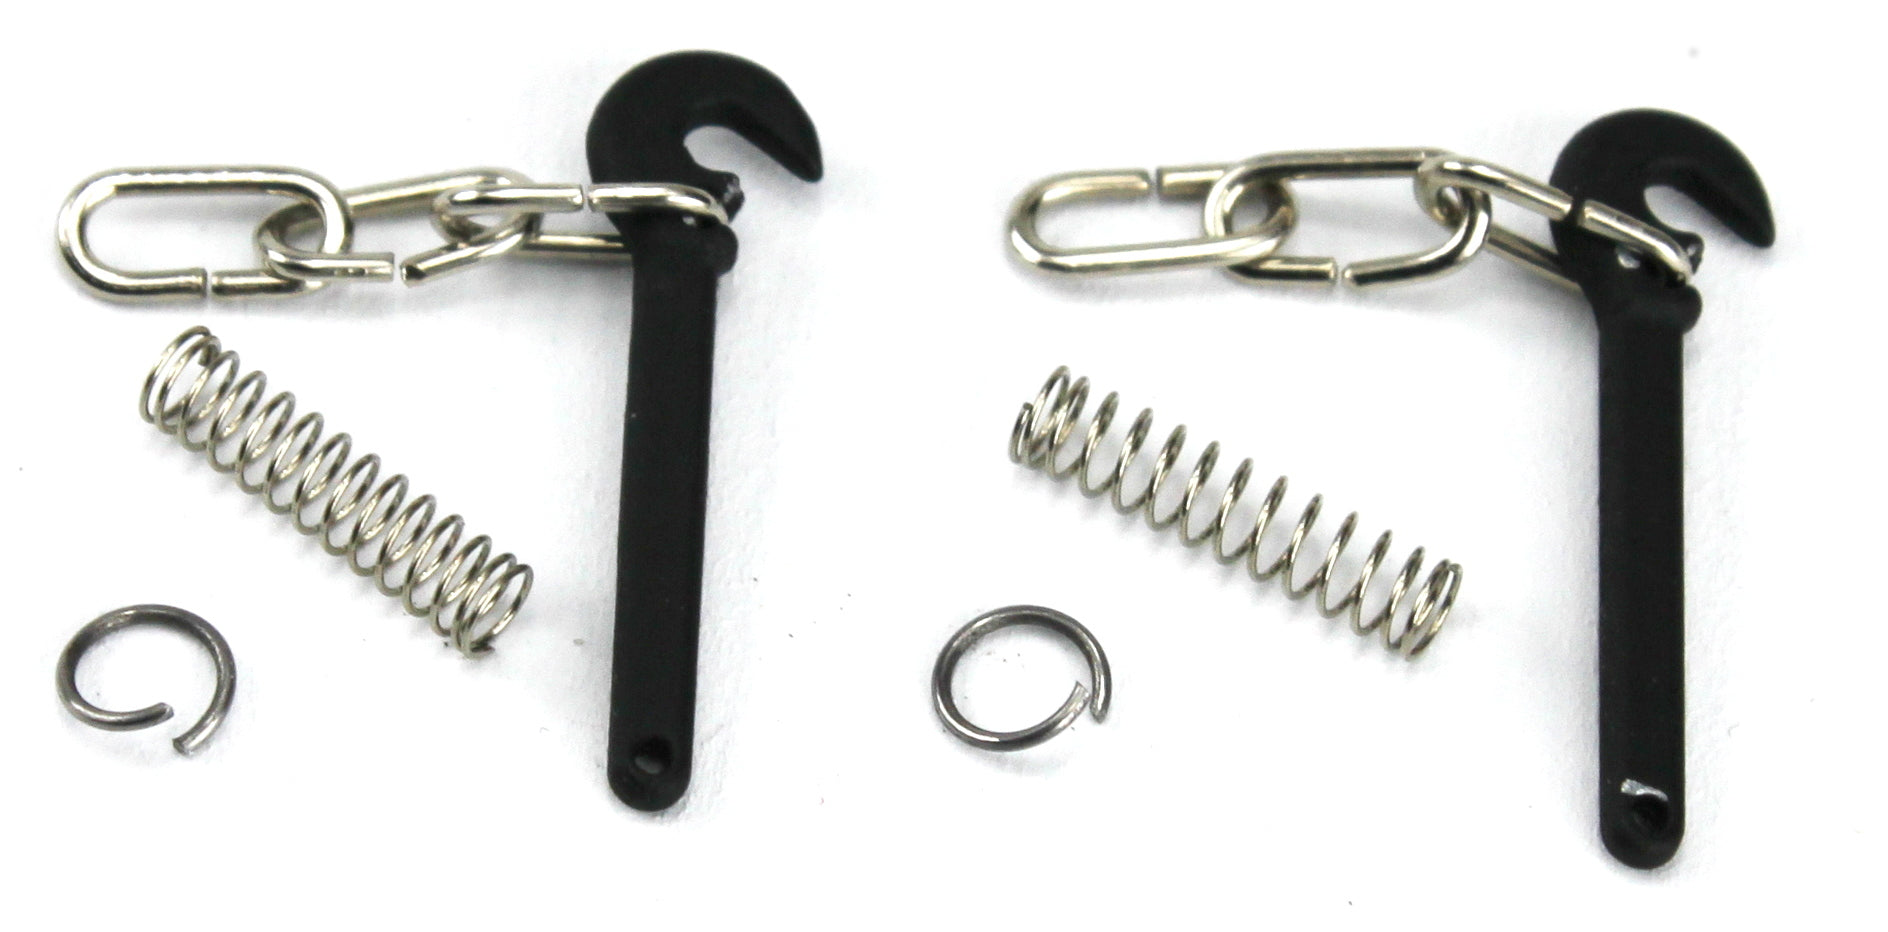 7A-000-008 O Gauge 3 Link Couplings and Hooks 5 Pairs for wagons